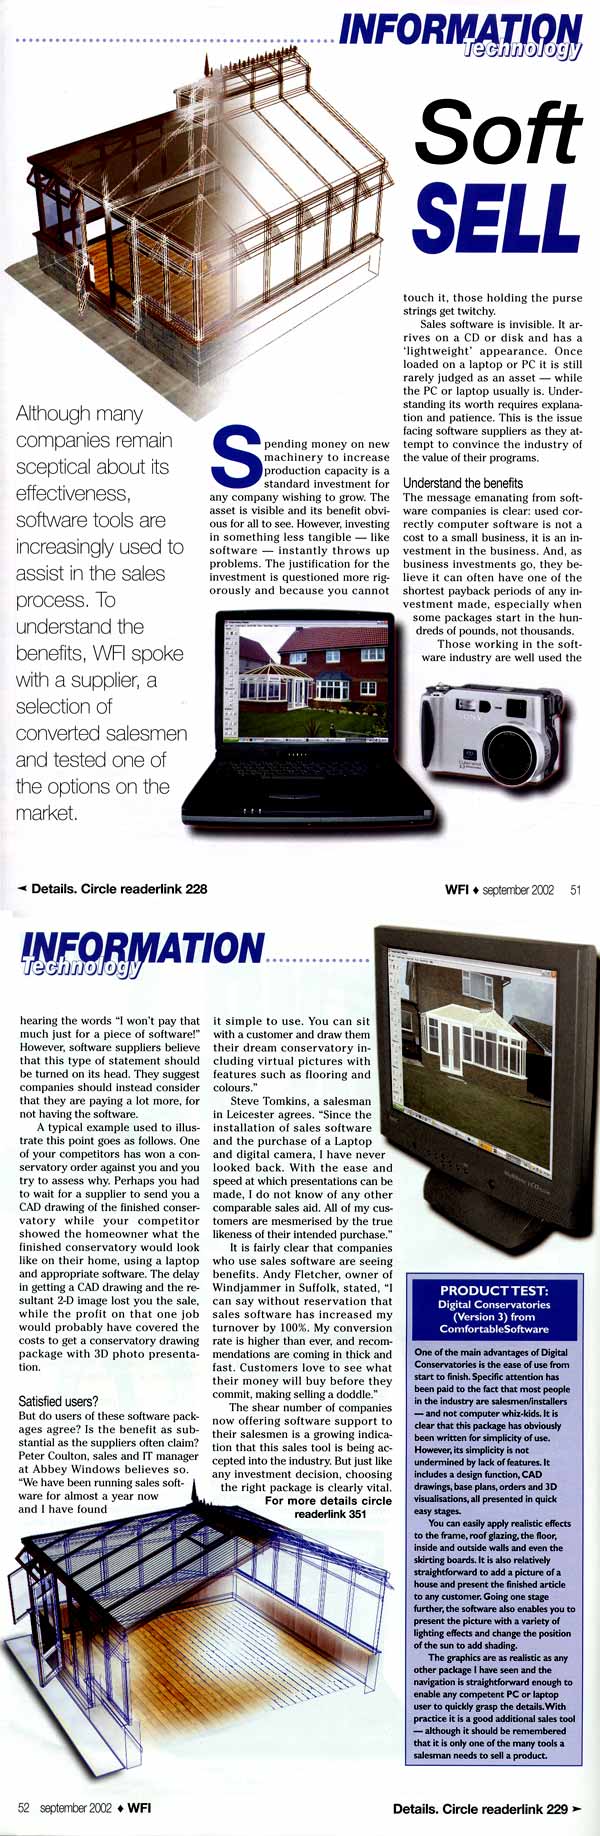 Article from the September 2002 issue of 'Window Fabricator and Installer'